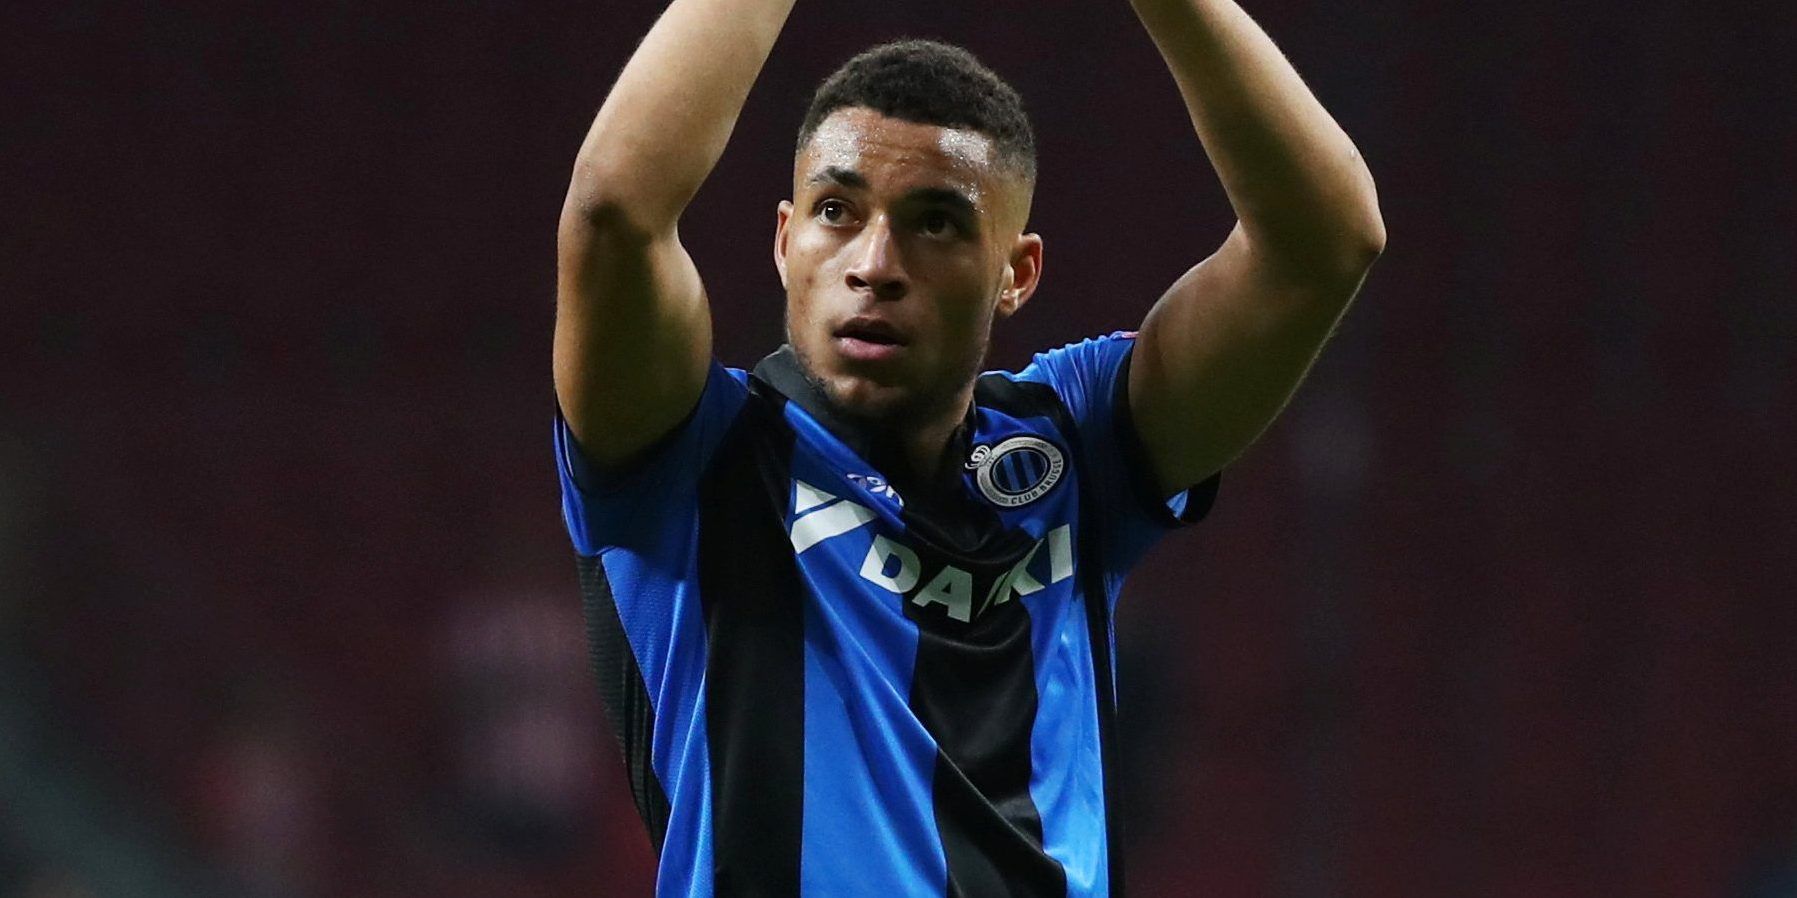 Soccer Football - Champions League - Group Stage - Group A - Atletico Madrid v Club Brugge - Wanda Metropolitano, Madrid, Spain - October 3, 2018  Club Brugge's Arnaut Danjuma applauds the fans at the end of the match    REUTERS/Sergio Perez